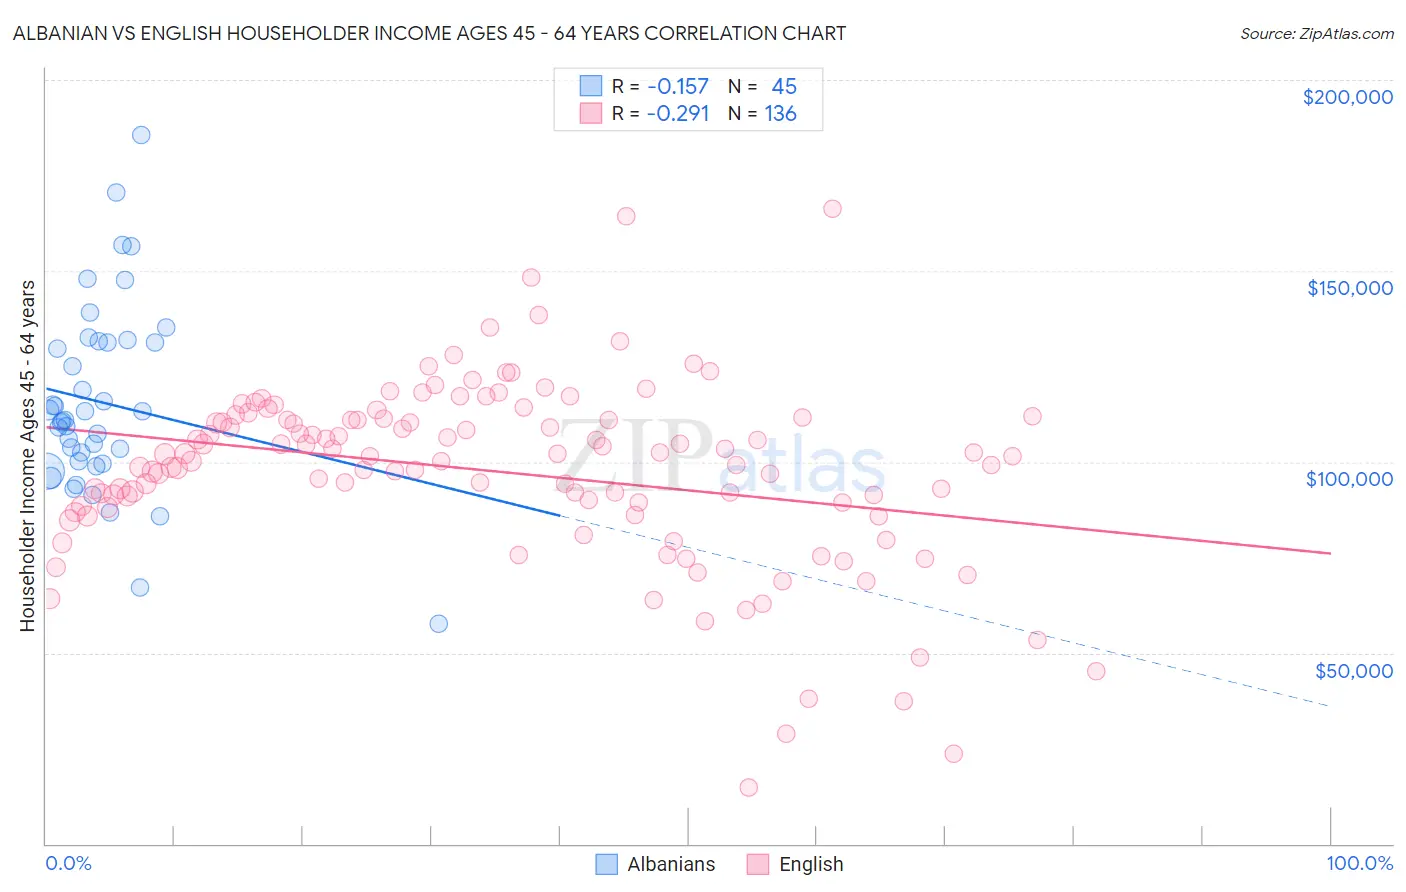 Albanian vs English Householder Income Ages 45 - 64 years